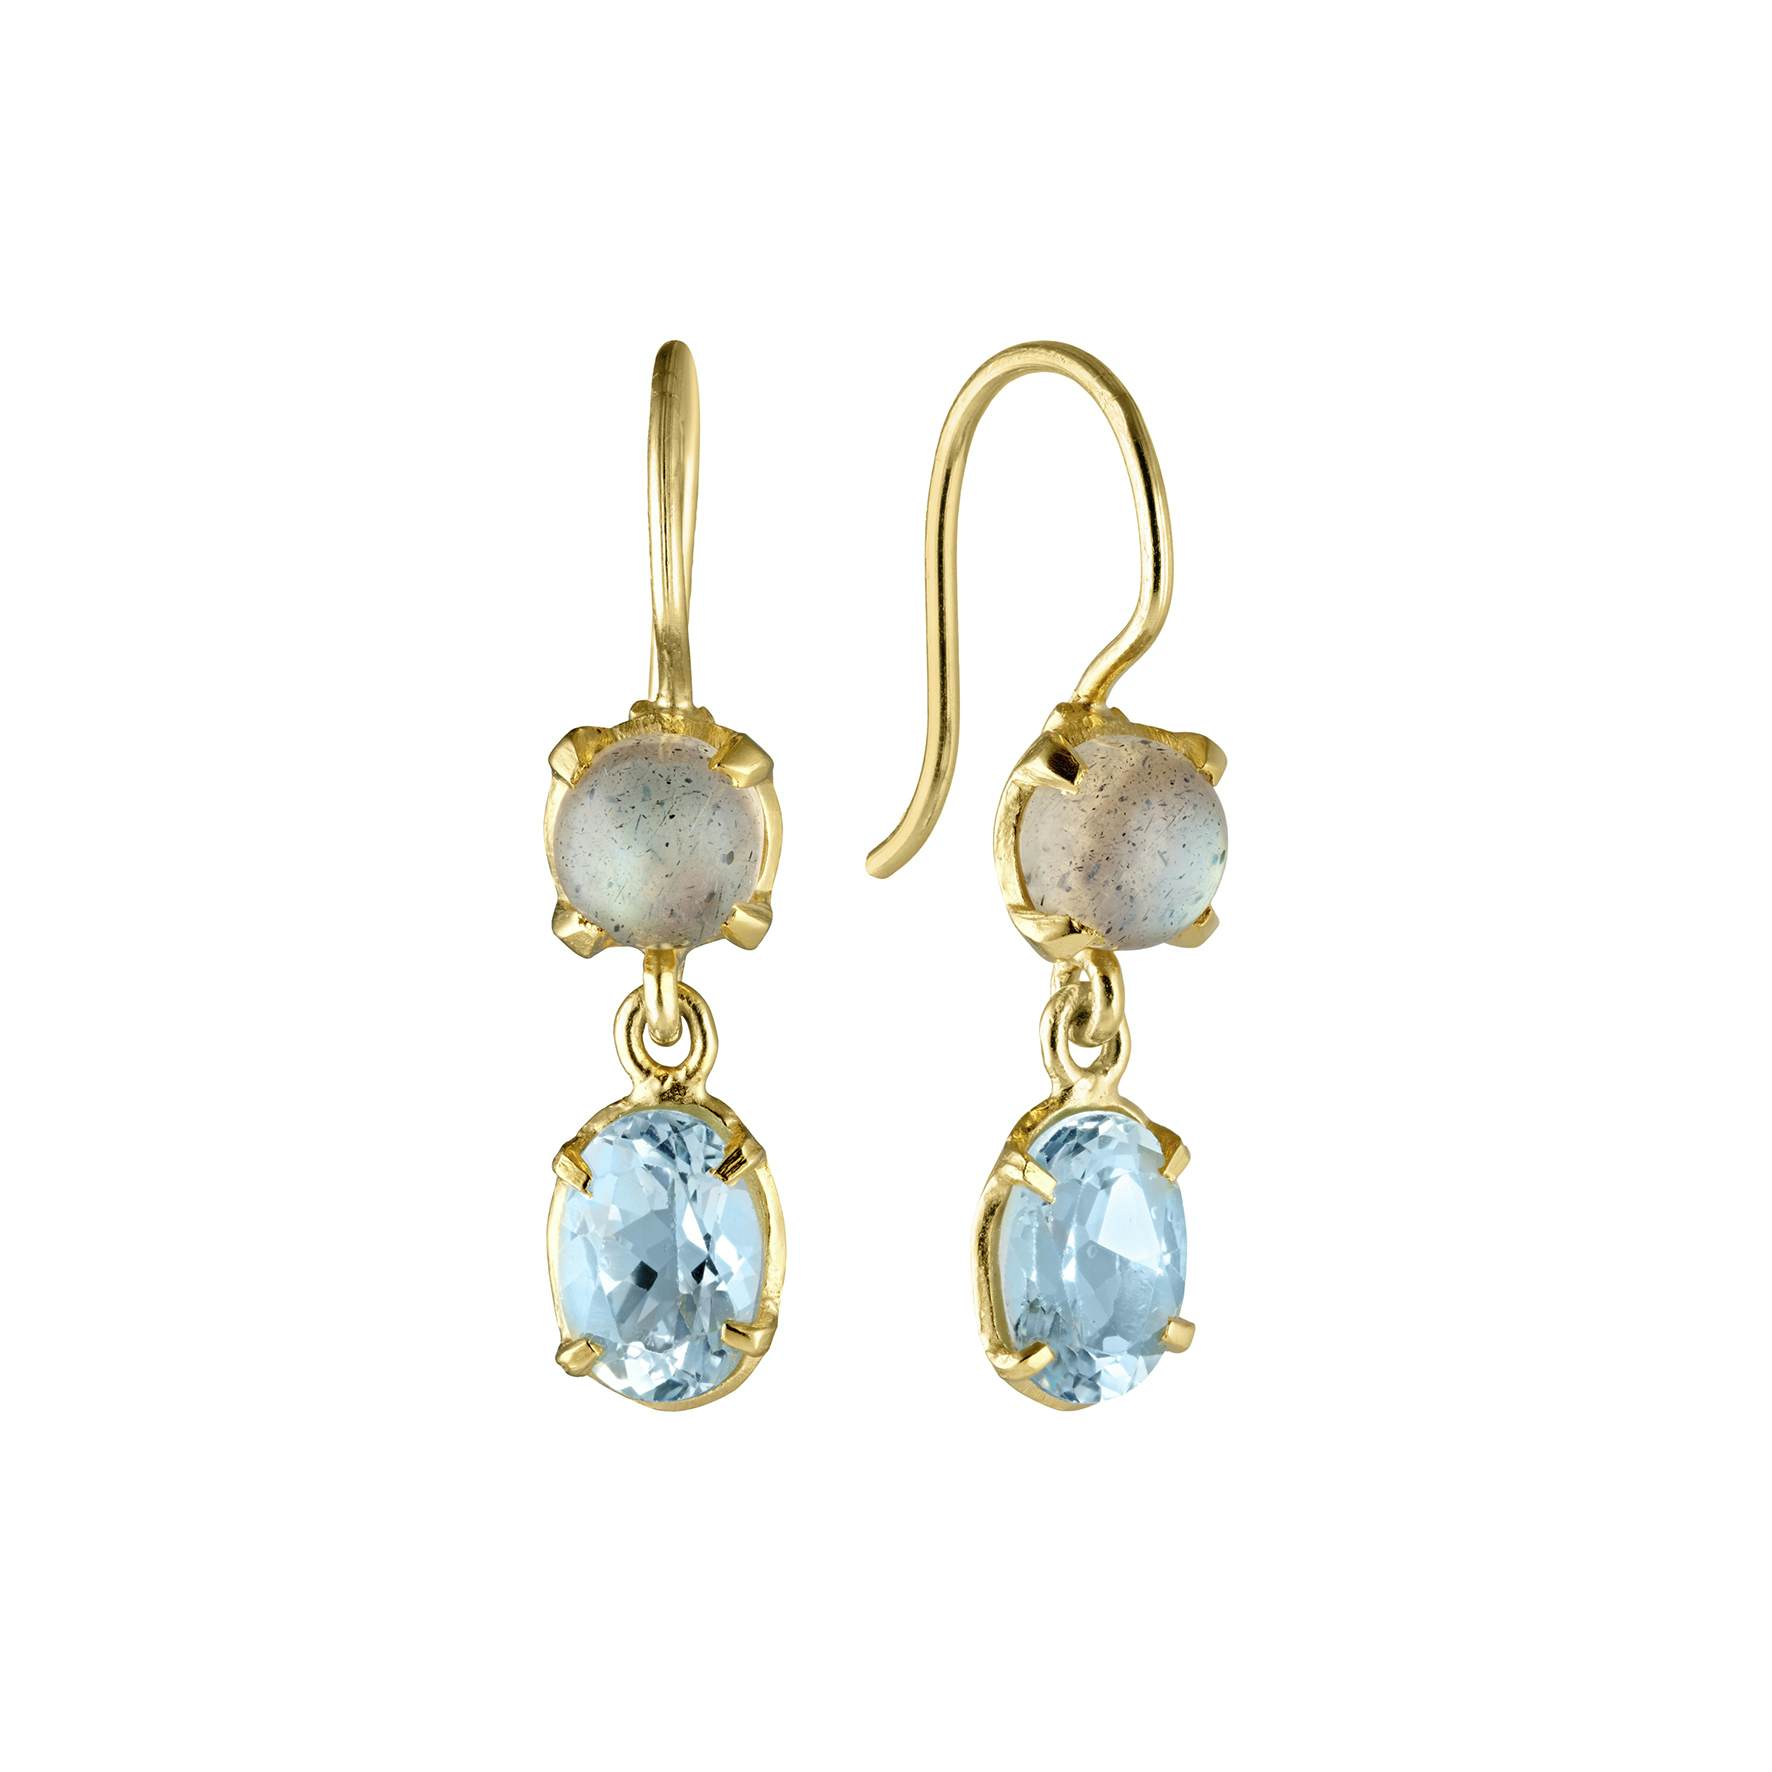 Gem Candy Earrings Labradorit from Carré in Goldplated-Silver Sterling 925